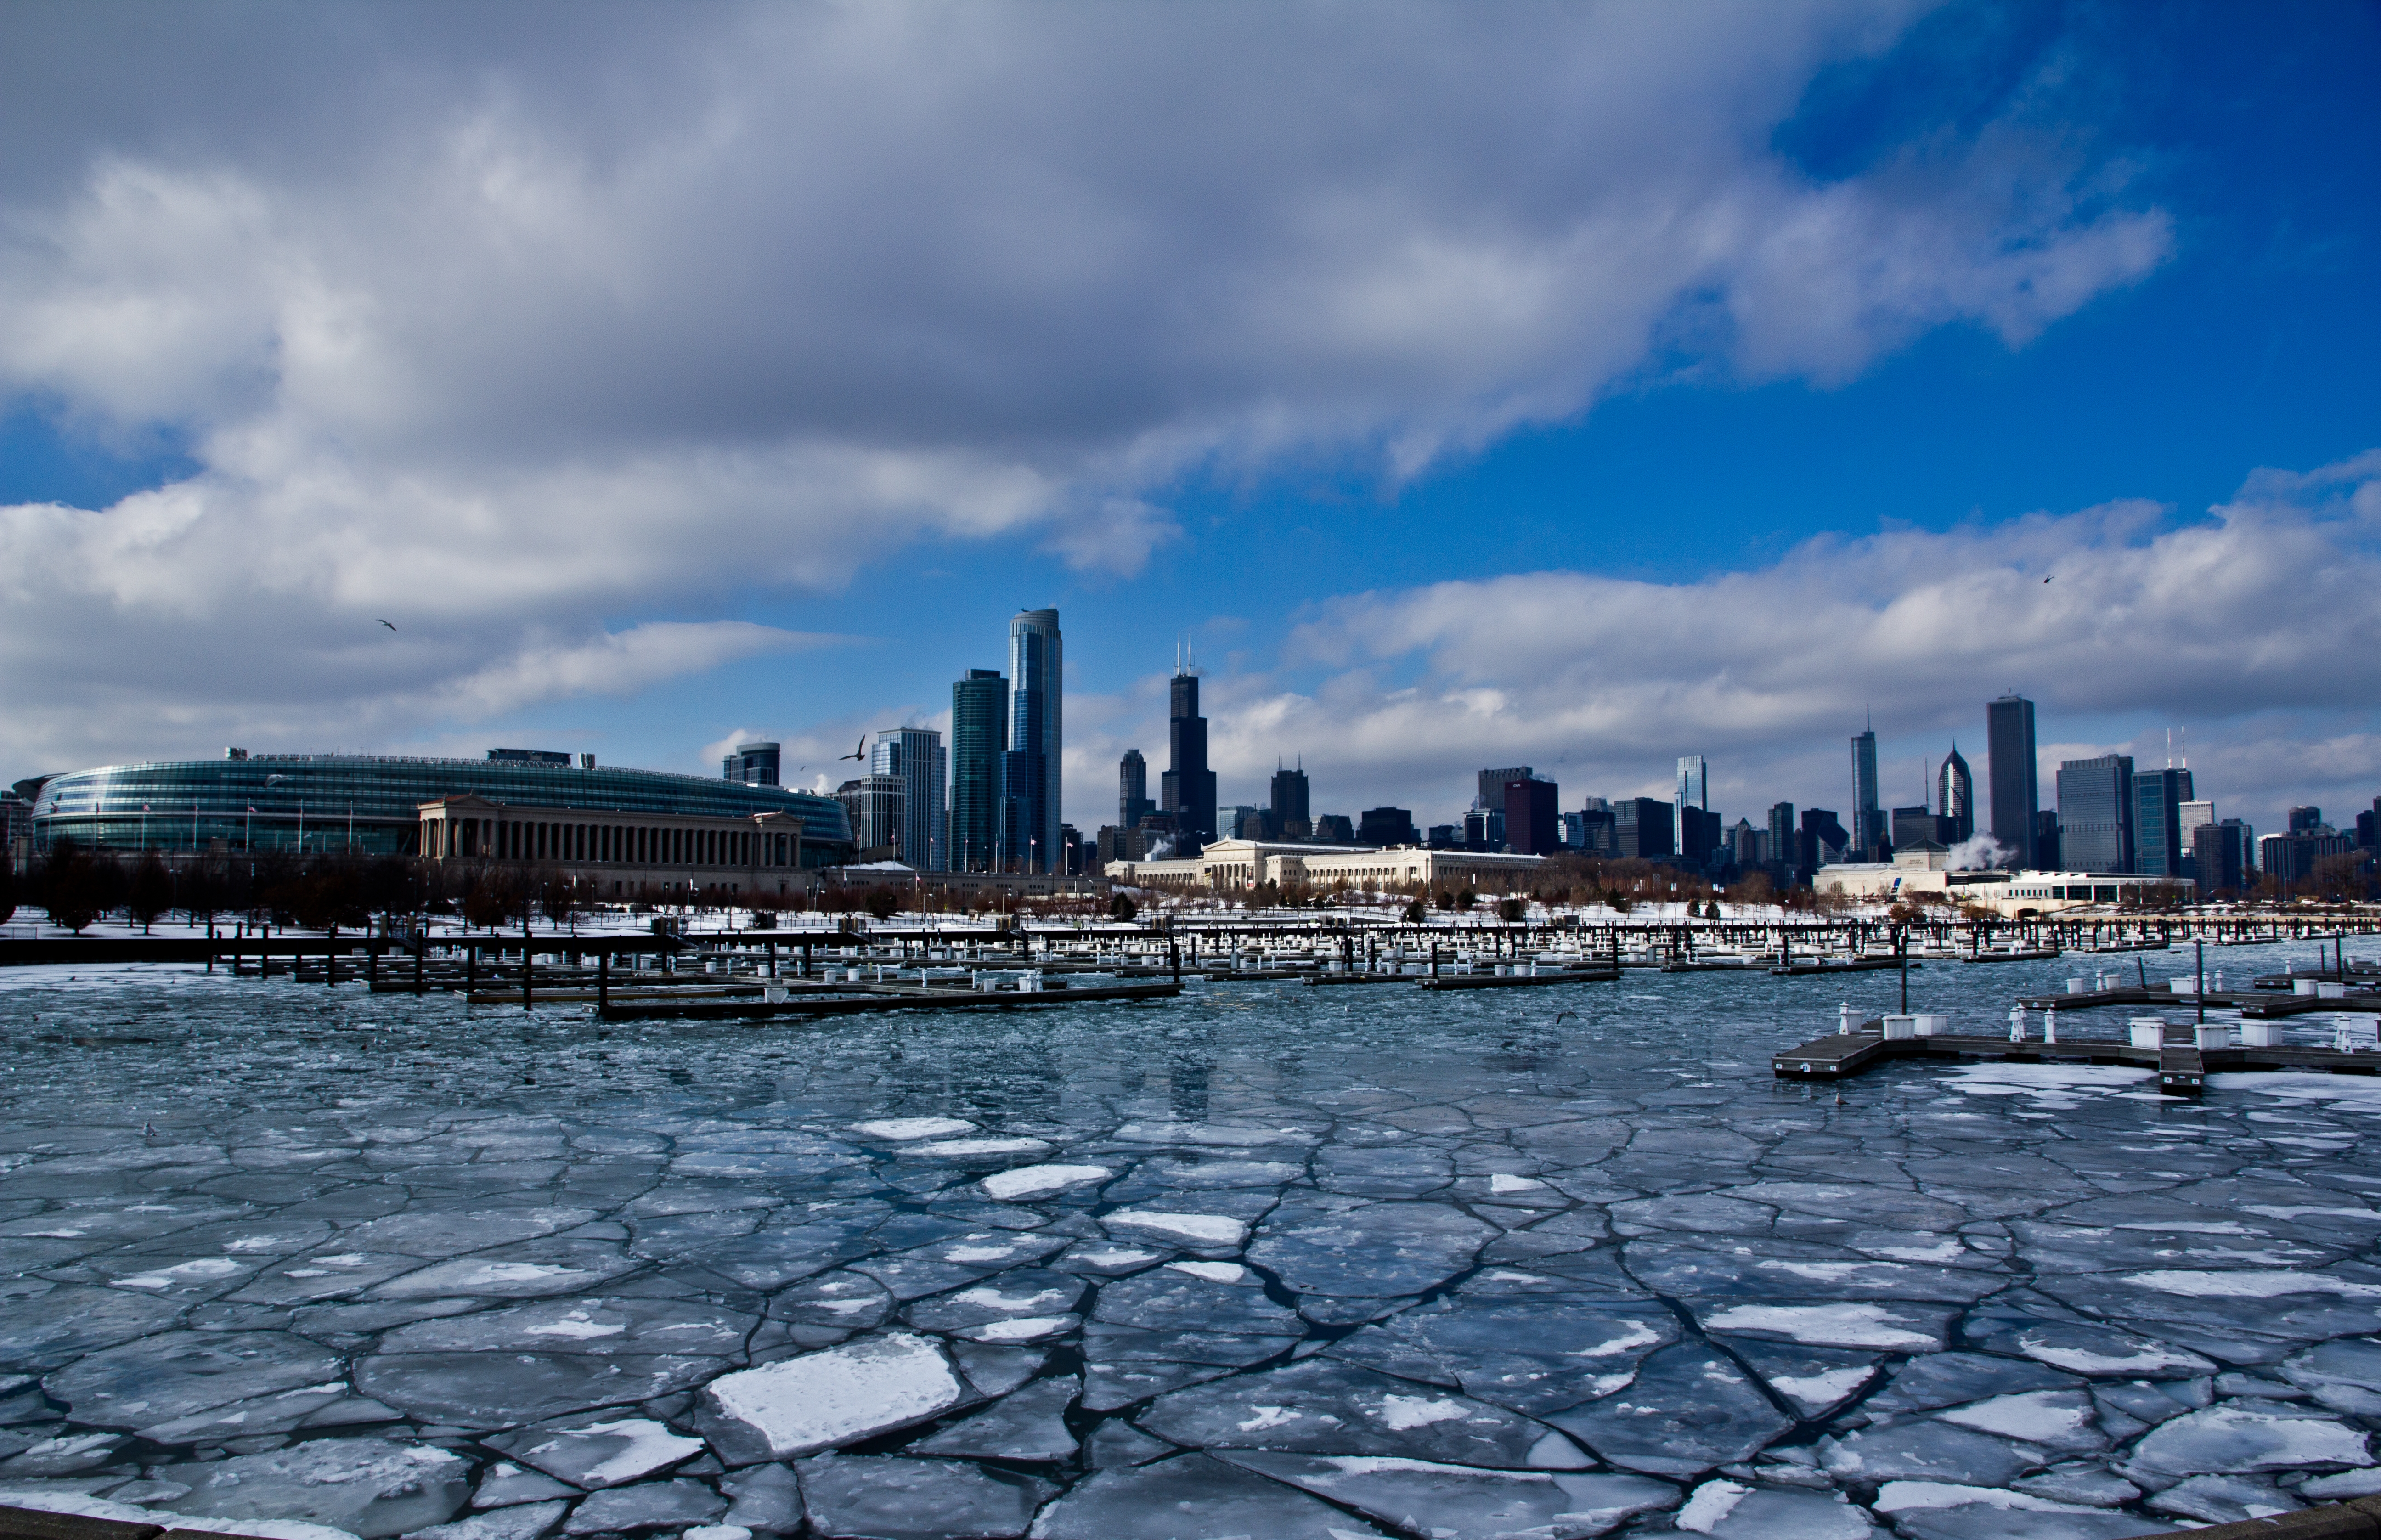 illinois, cities, winter, ice, usa, building, skyscrapers, united states, port, america, ice floes, chicago, zdnia, zleds